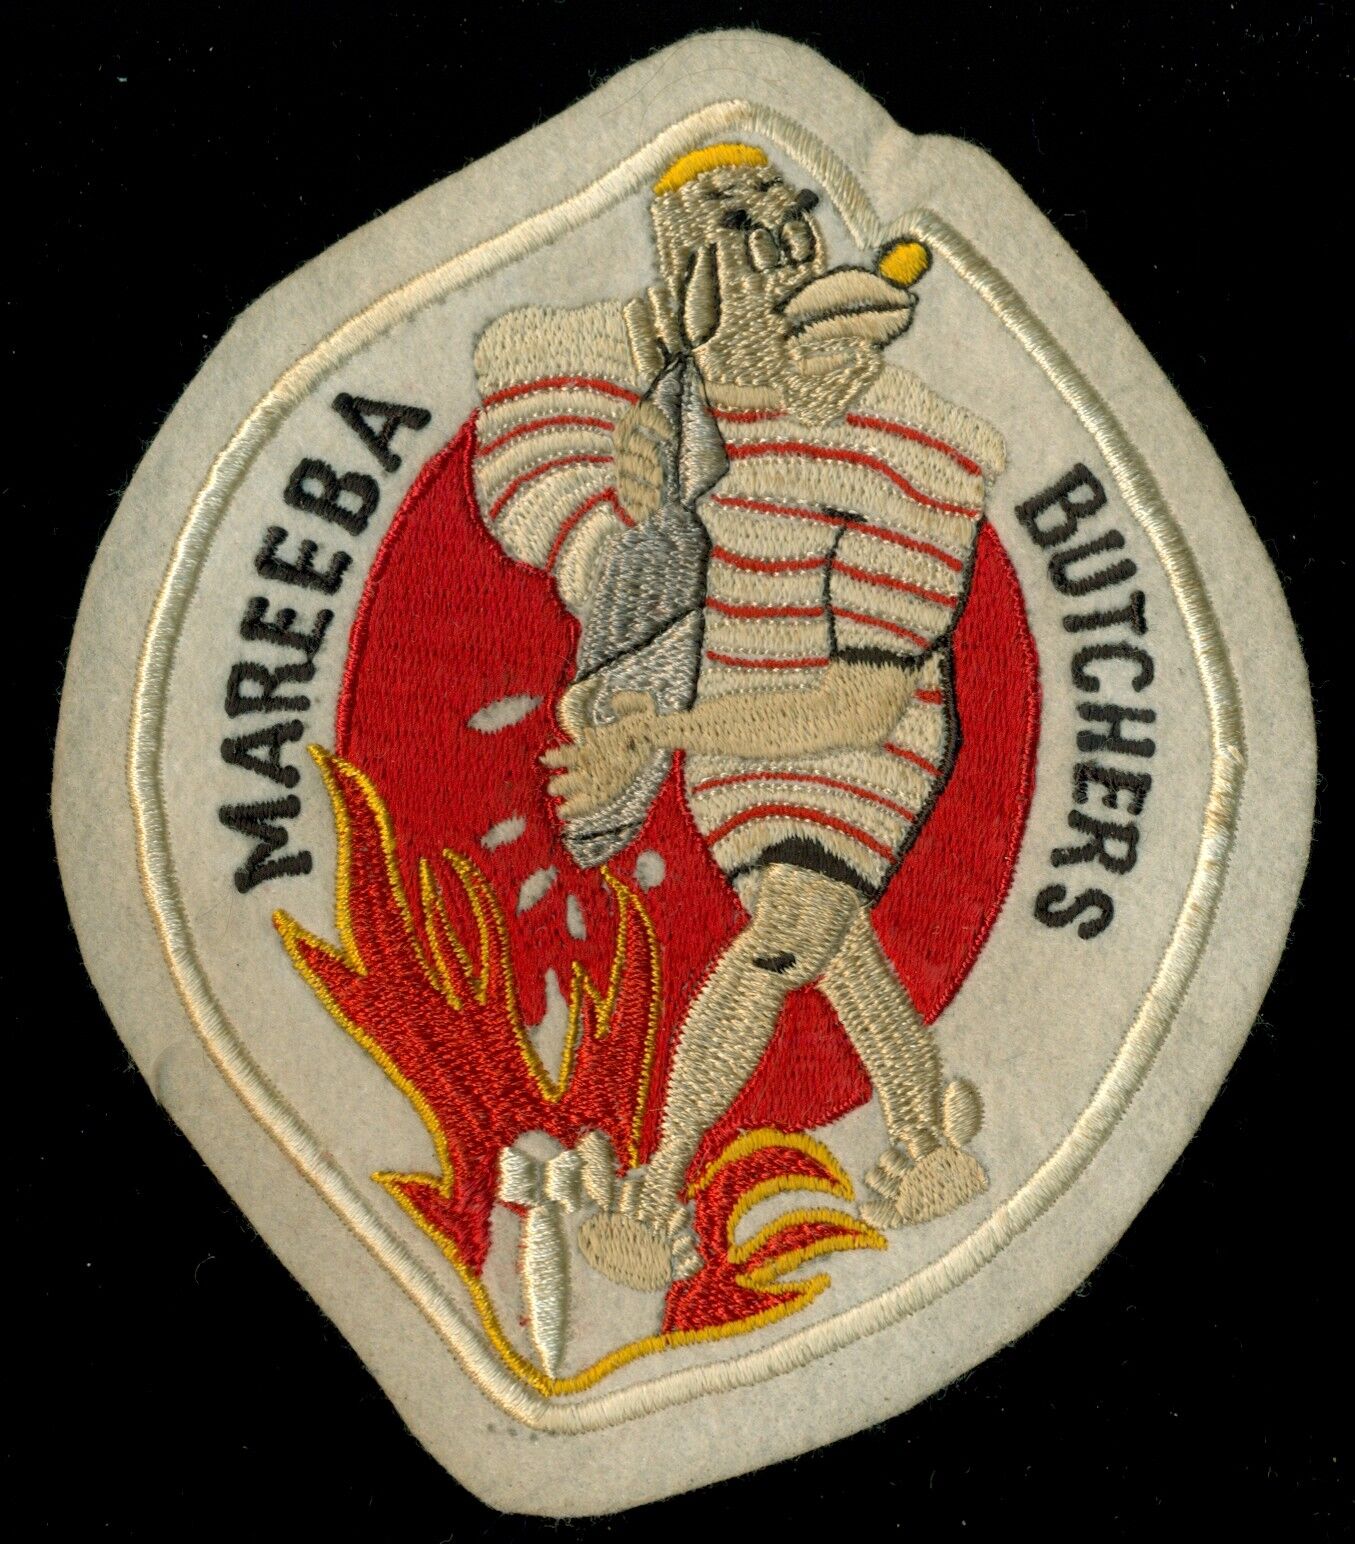 USAF 403rd Bombardment Squadron WW2 or Later Patch N-8